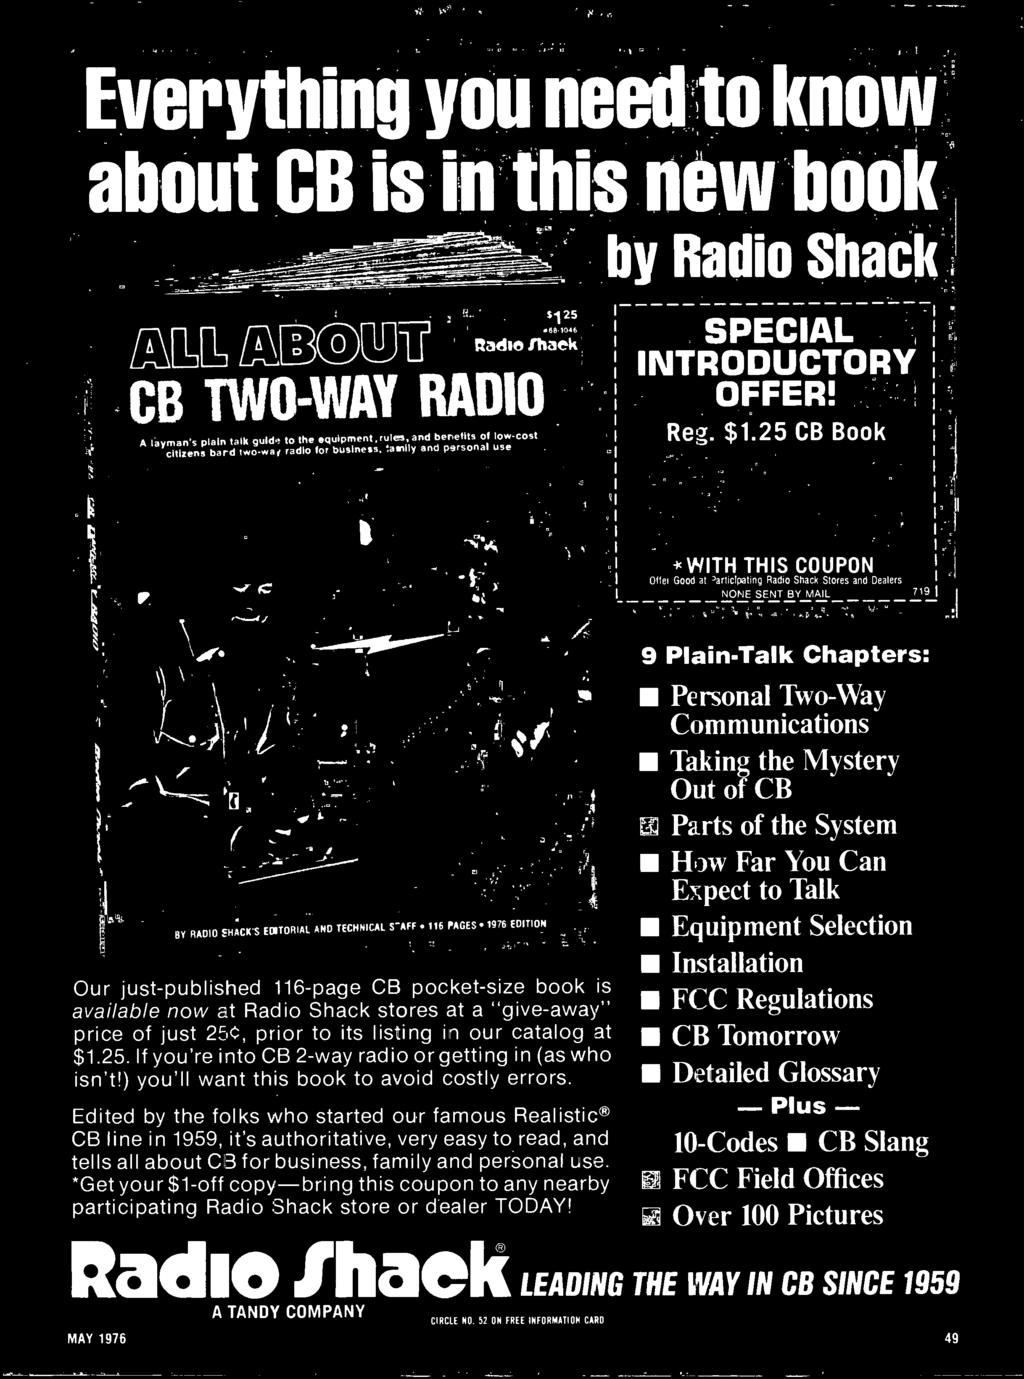 EDITION Our just -published 116 -page CB pocket-size book is available now at Radio Shack stores at a "give-away" price of just 255 prior to its listing in our catalog at $1.25. If you're into CB 2 -way radio or getting in (as who isn't!